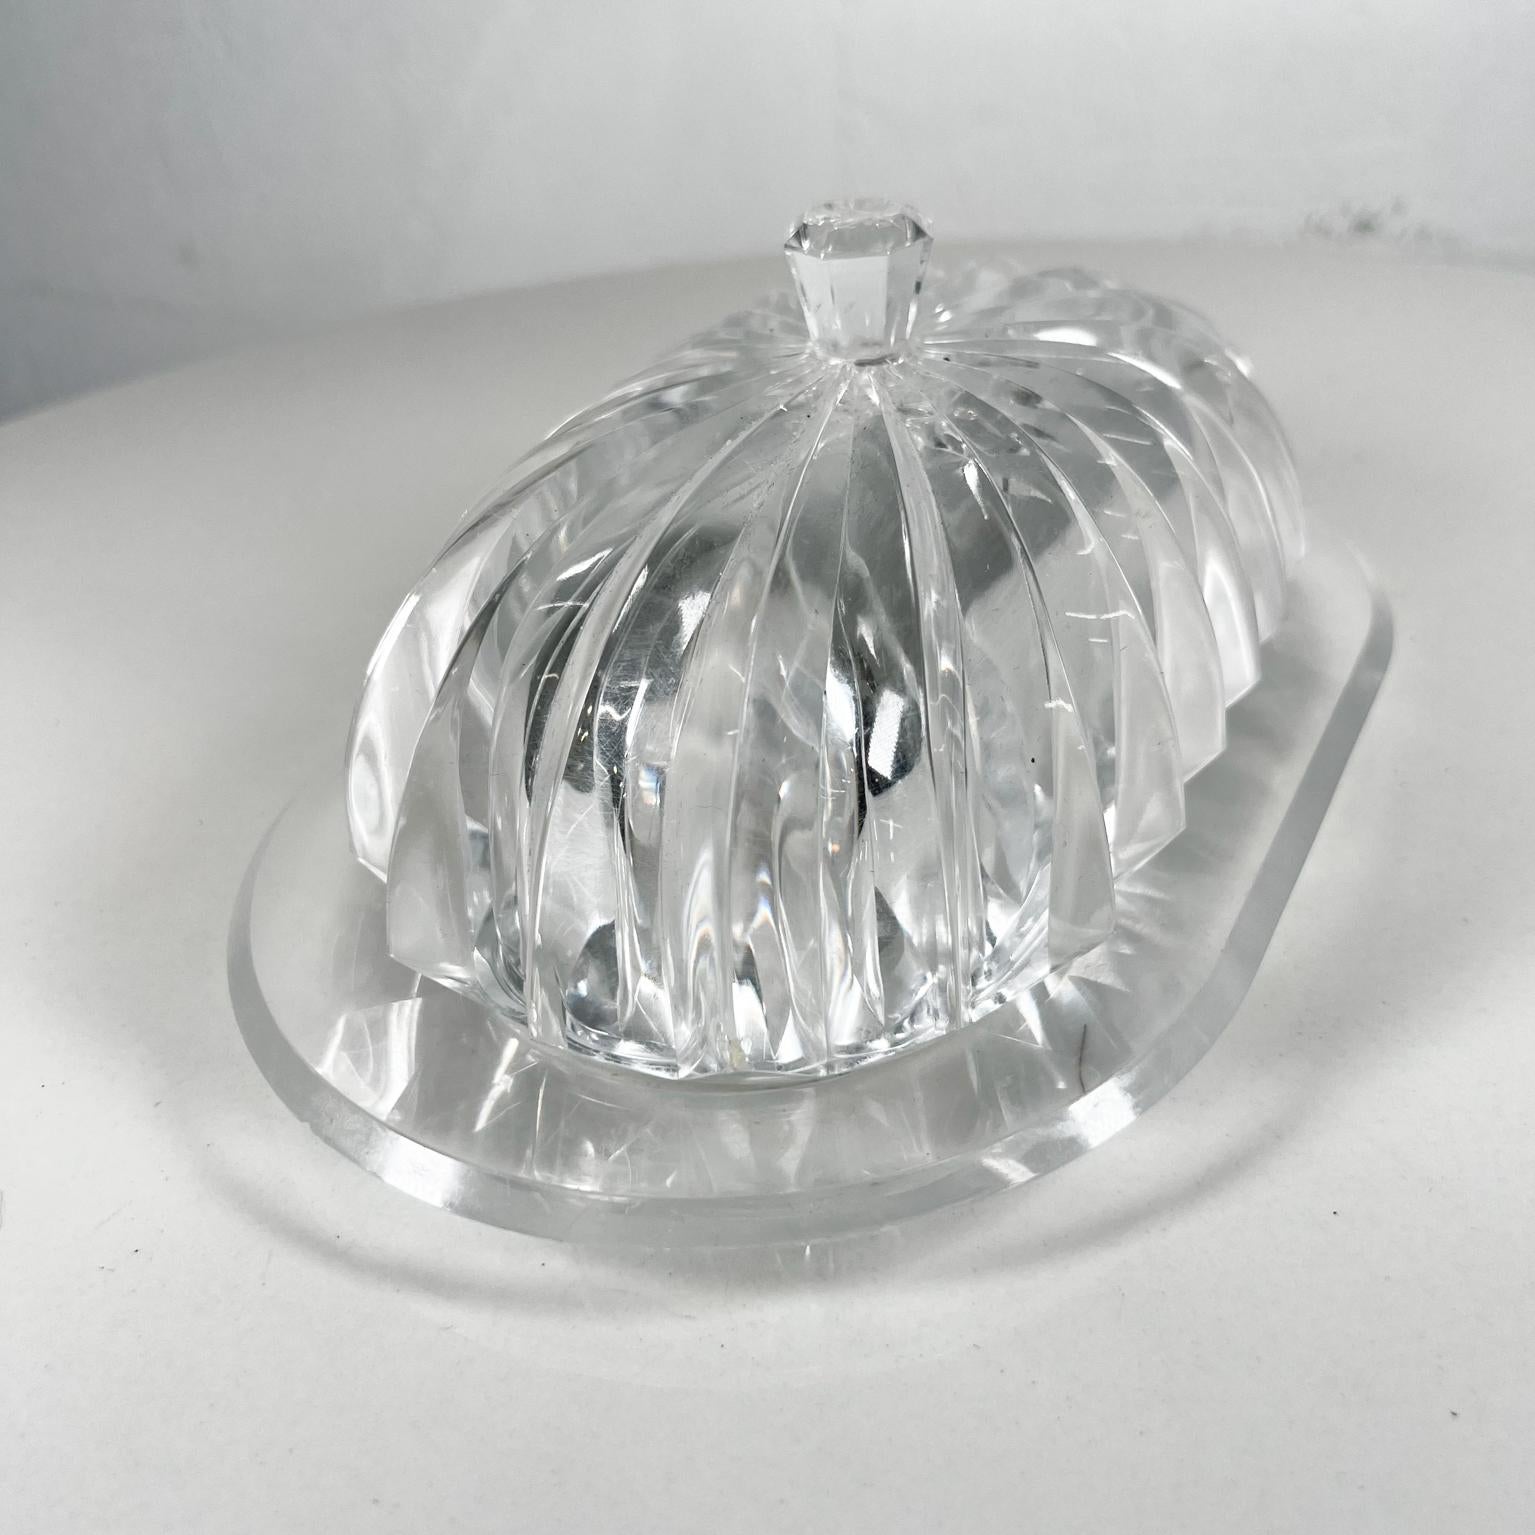 20th Century 1970s Modern Ribbed Butter Dish Tiara Lucite Grainware by William Bounds